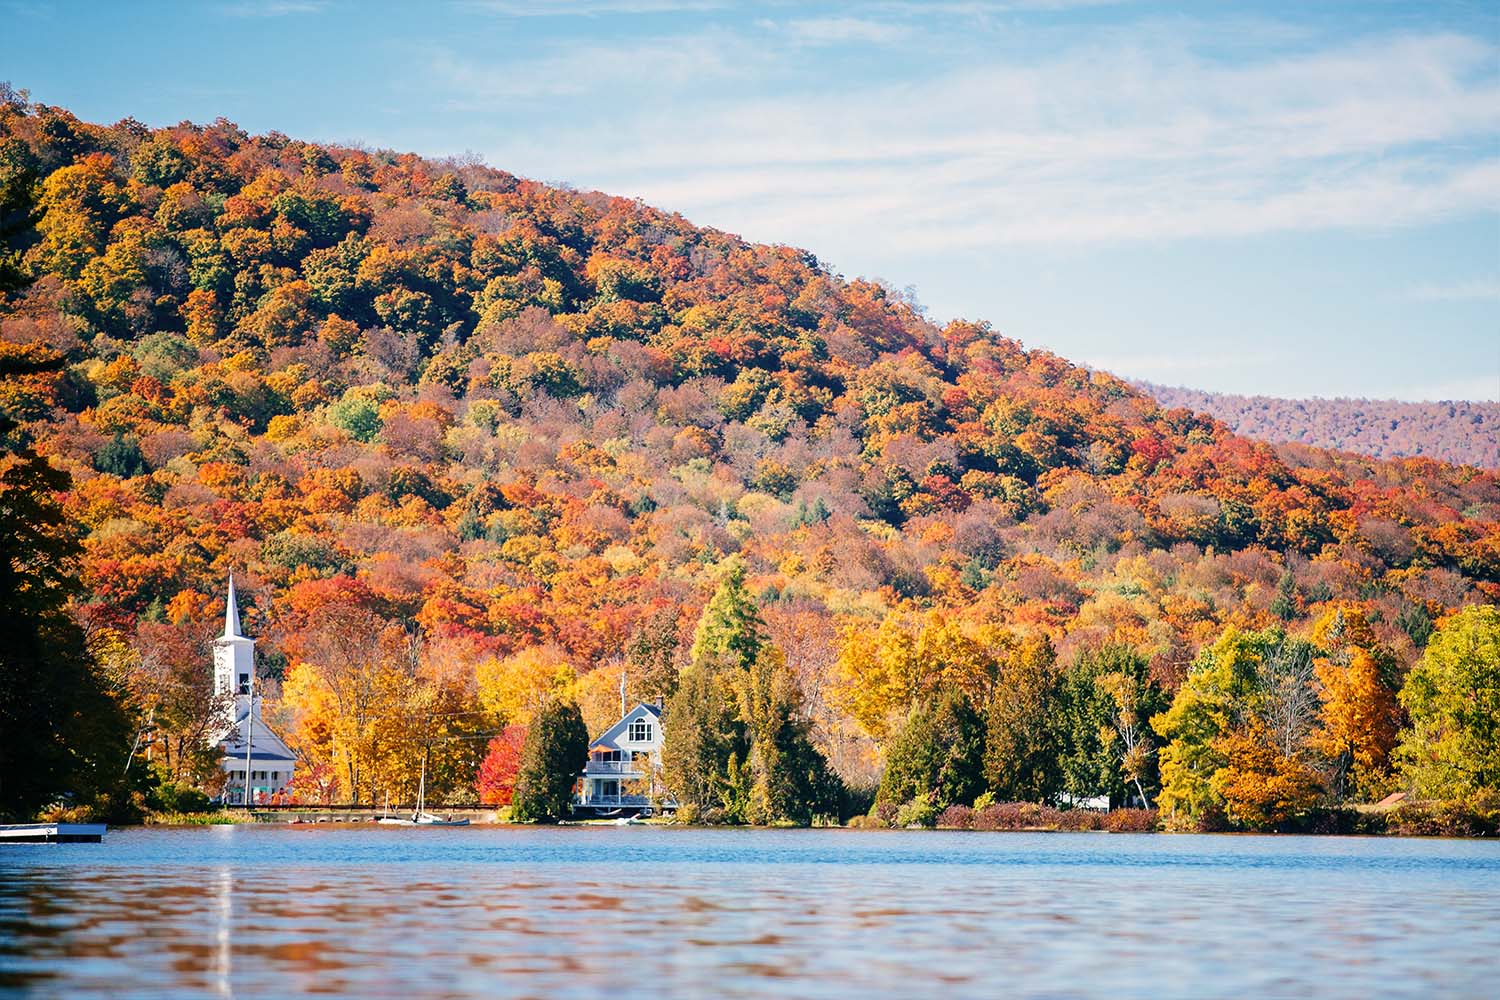 A view from the water on Silver Lake in Barnard, Vermont during peak foliage.